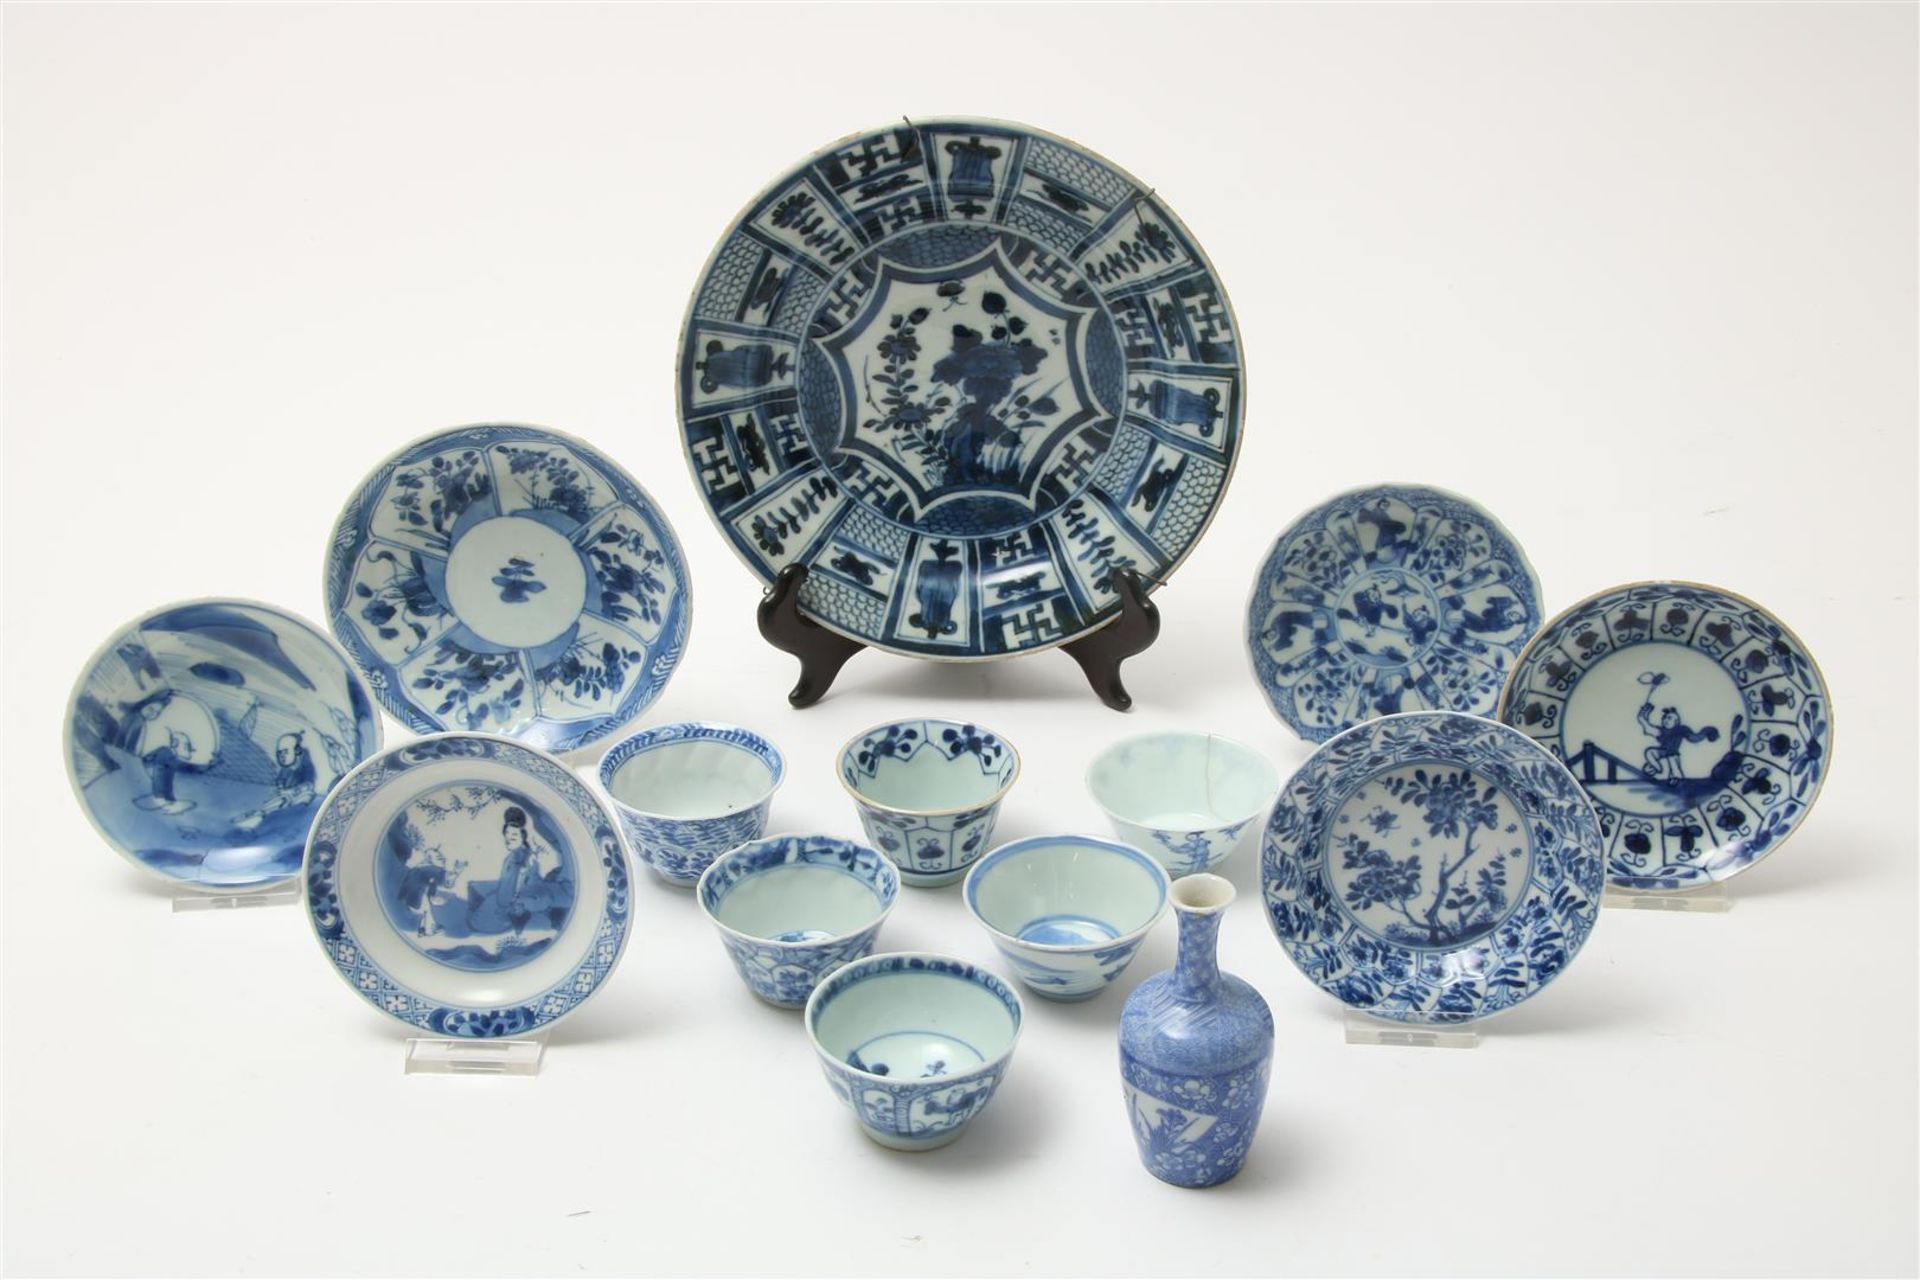 Lot of various porcelain, China, 18th/19th century, saucer with figures in a garden, various cups